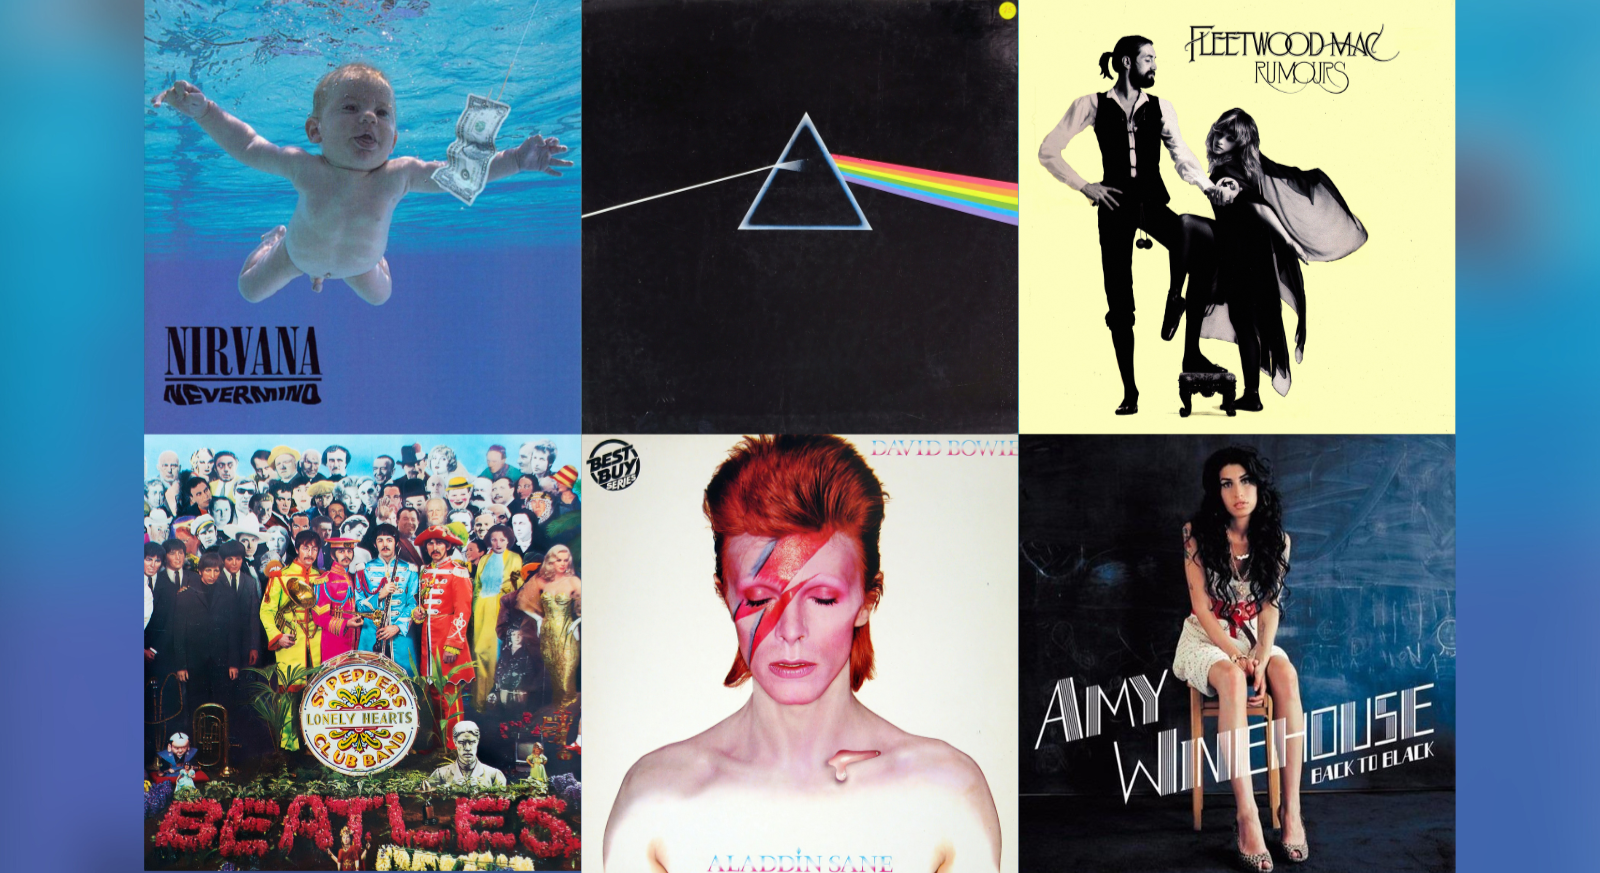 Instantly takes you back' – Are these the most iconic album covers ever?